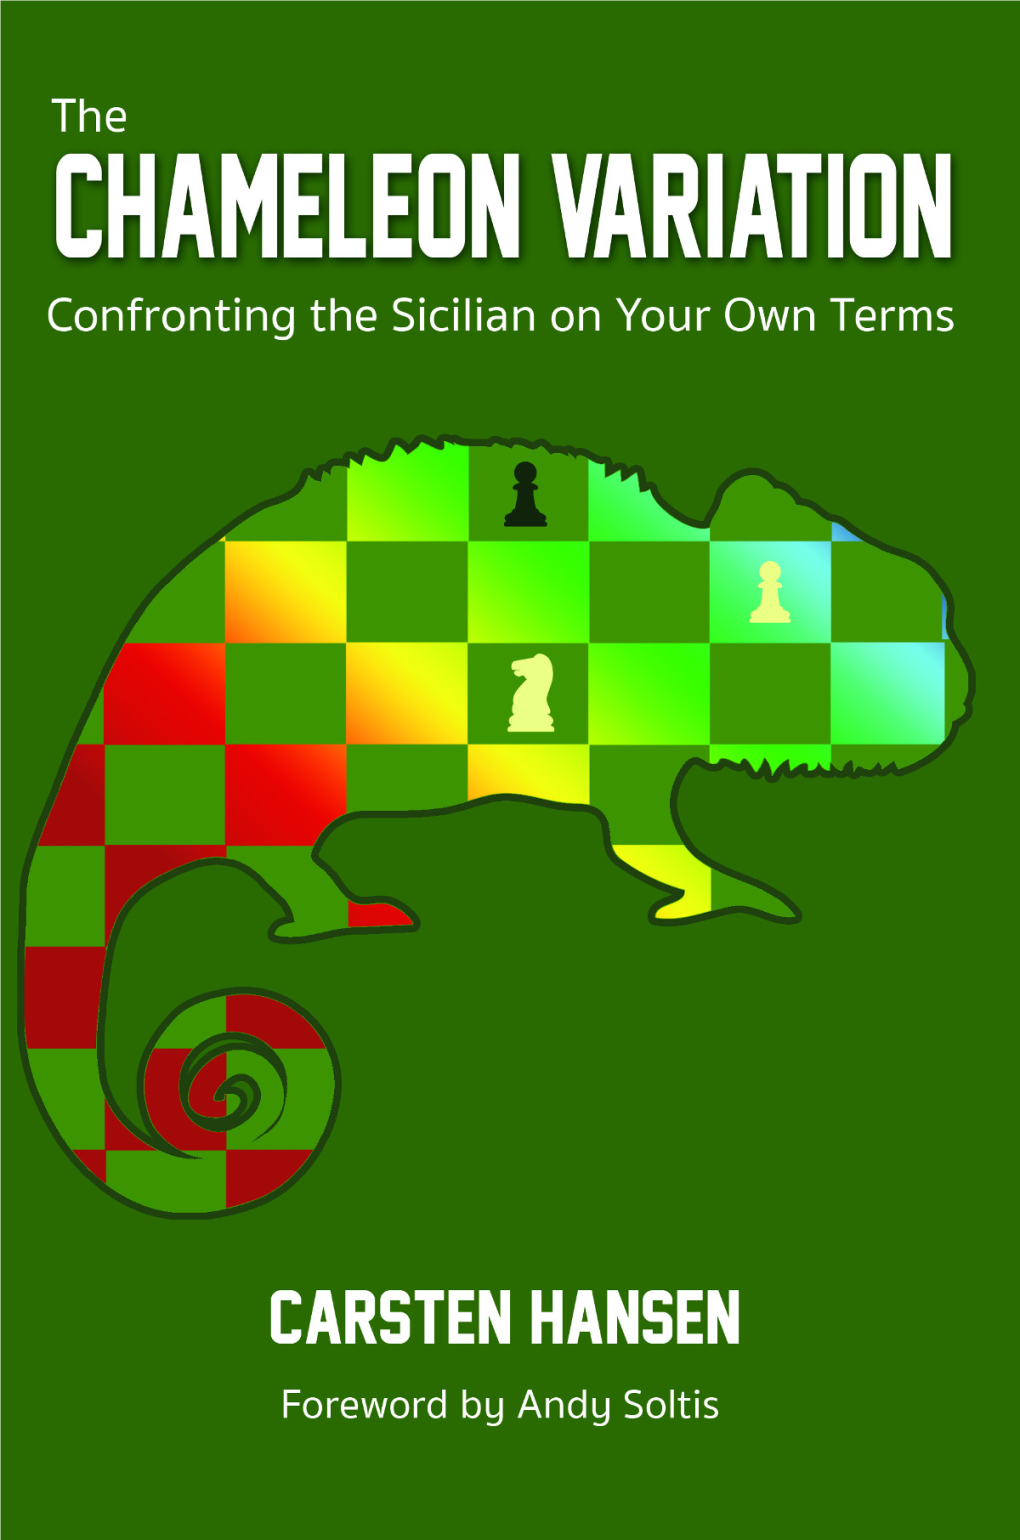 The Chameleon Variation Confronting the Sicilian on Your Own Terms by Carsten Hansen